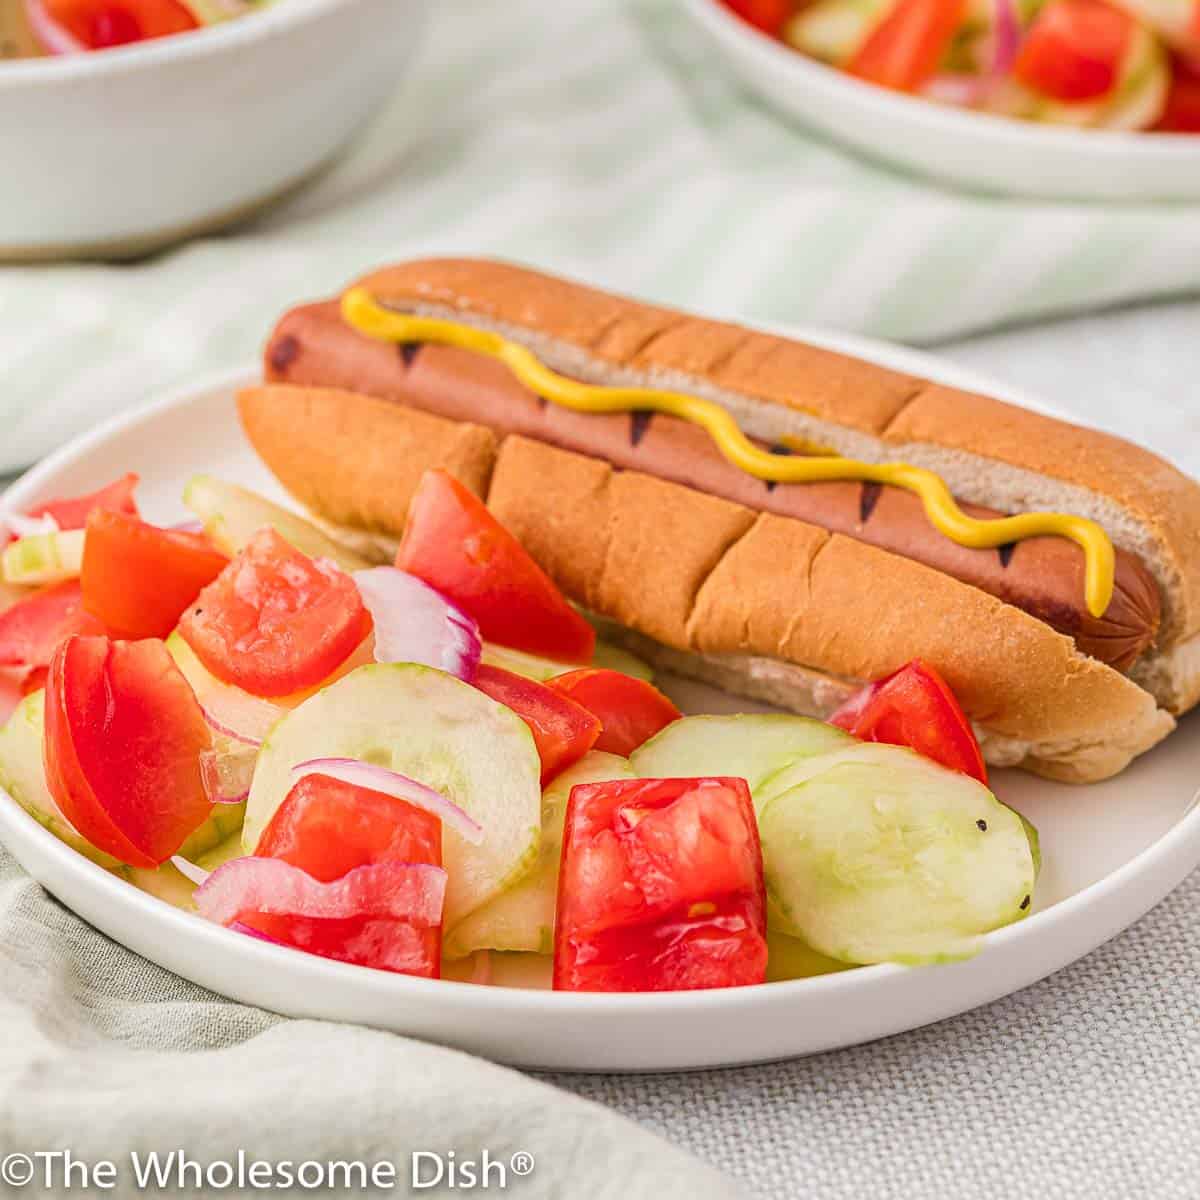 Cucumber salad and a hot dog on a white plate.